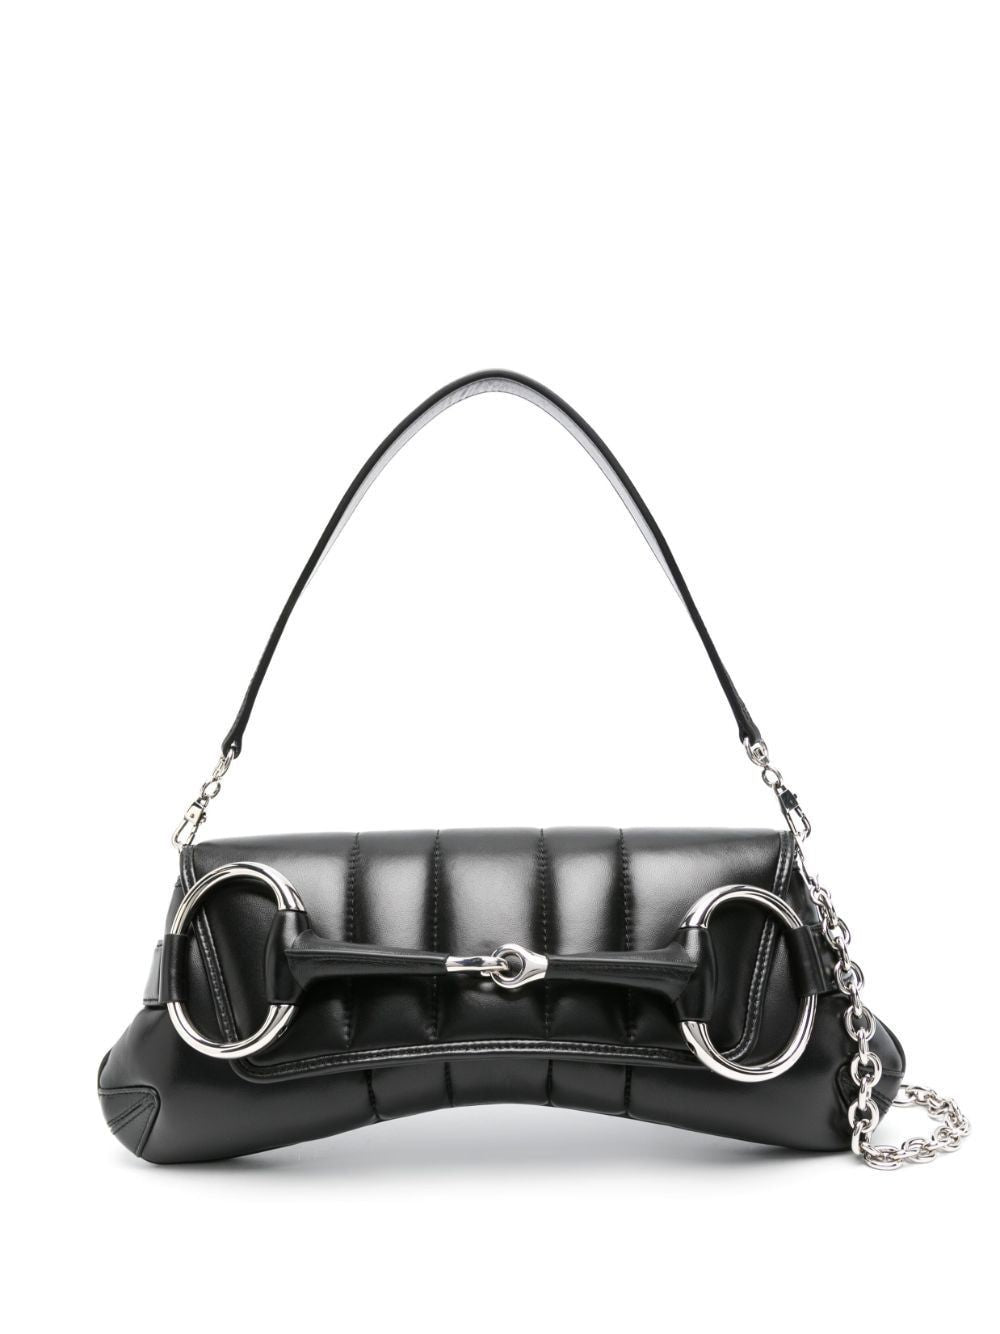 GUCCI Quilted Black Leather Medium Shoulder Bag with Maxi Horsebit Detail